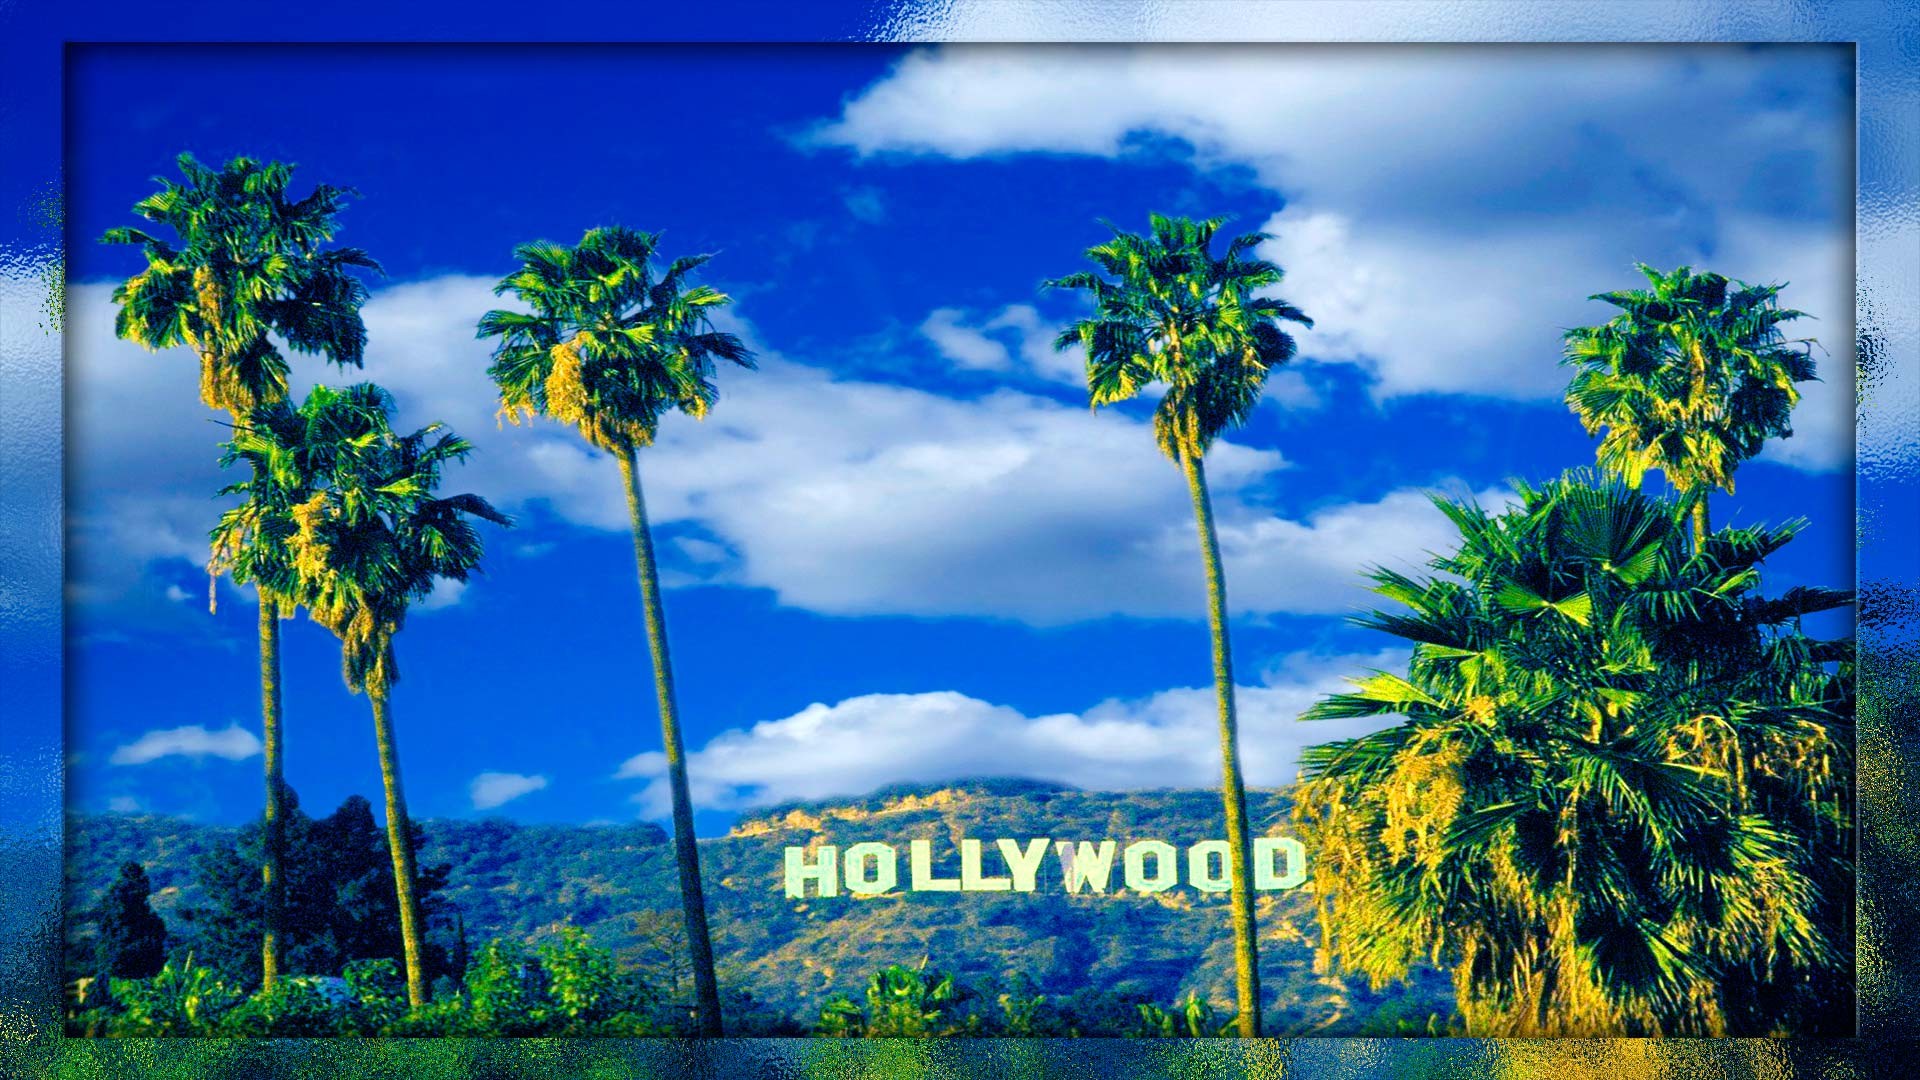 1920x1080 Stunning Hollywood Sign Images